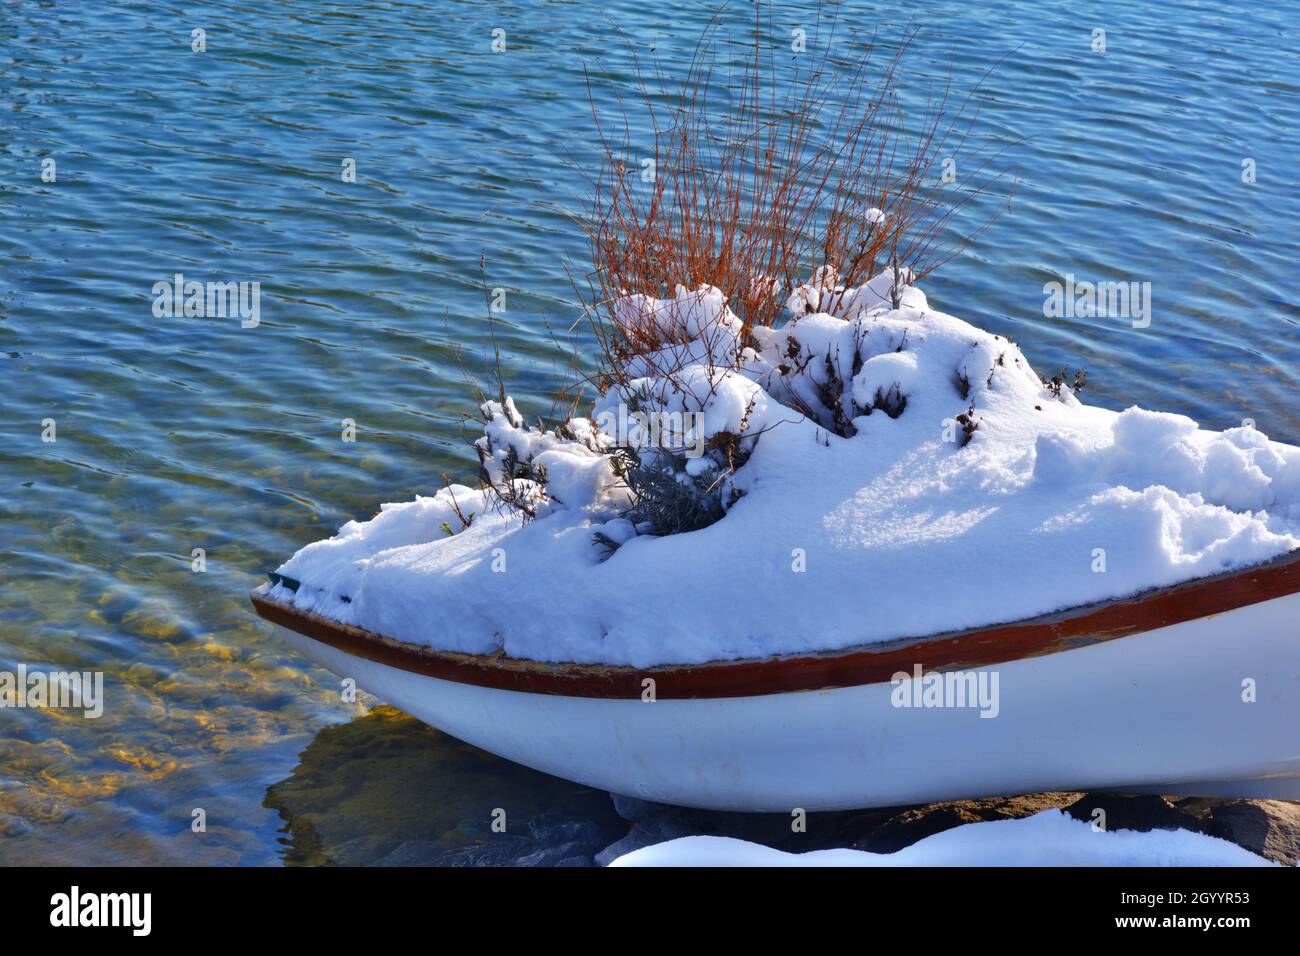 Small wooden rowing boat at lakeside under snow in winter Stock Photo